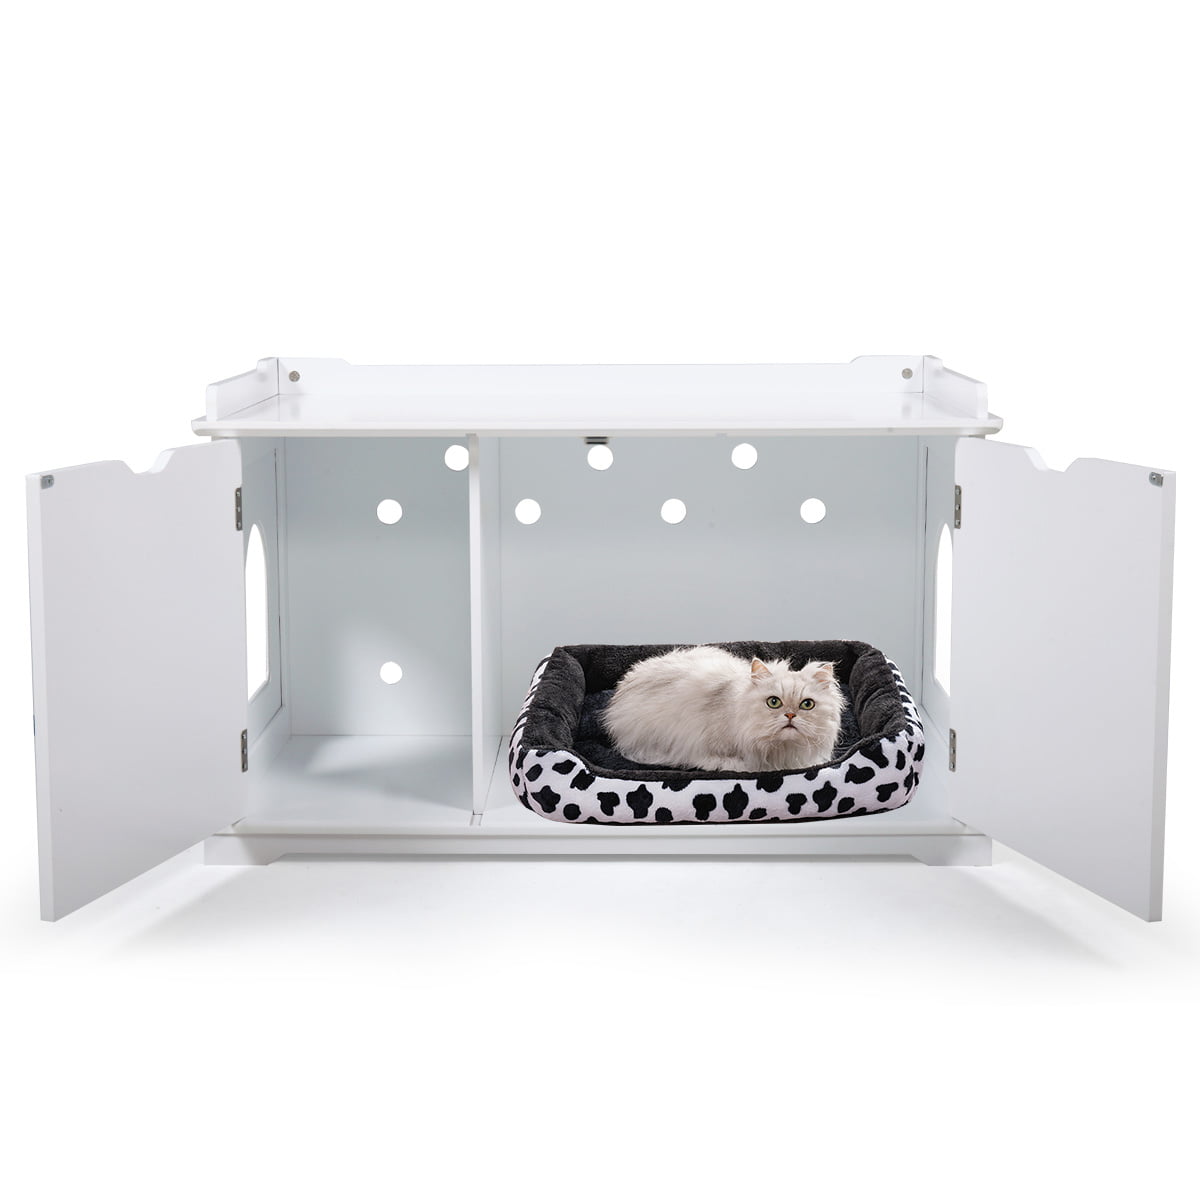 Veryke Wooden Pet Cat House Enclosure Outside Shelter Animal Cage Storage Bench Furniture Cabinet, White